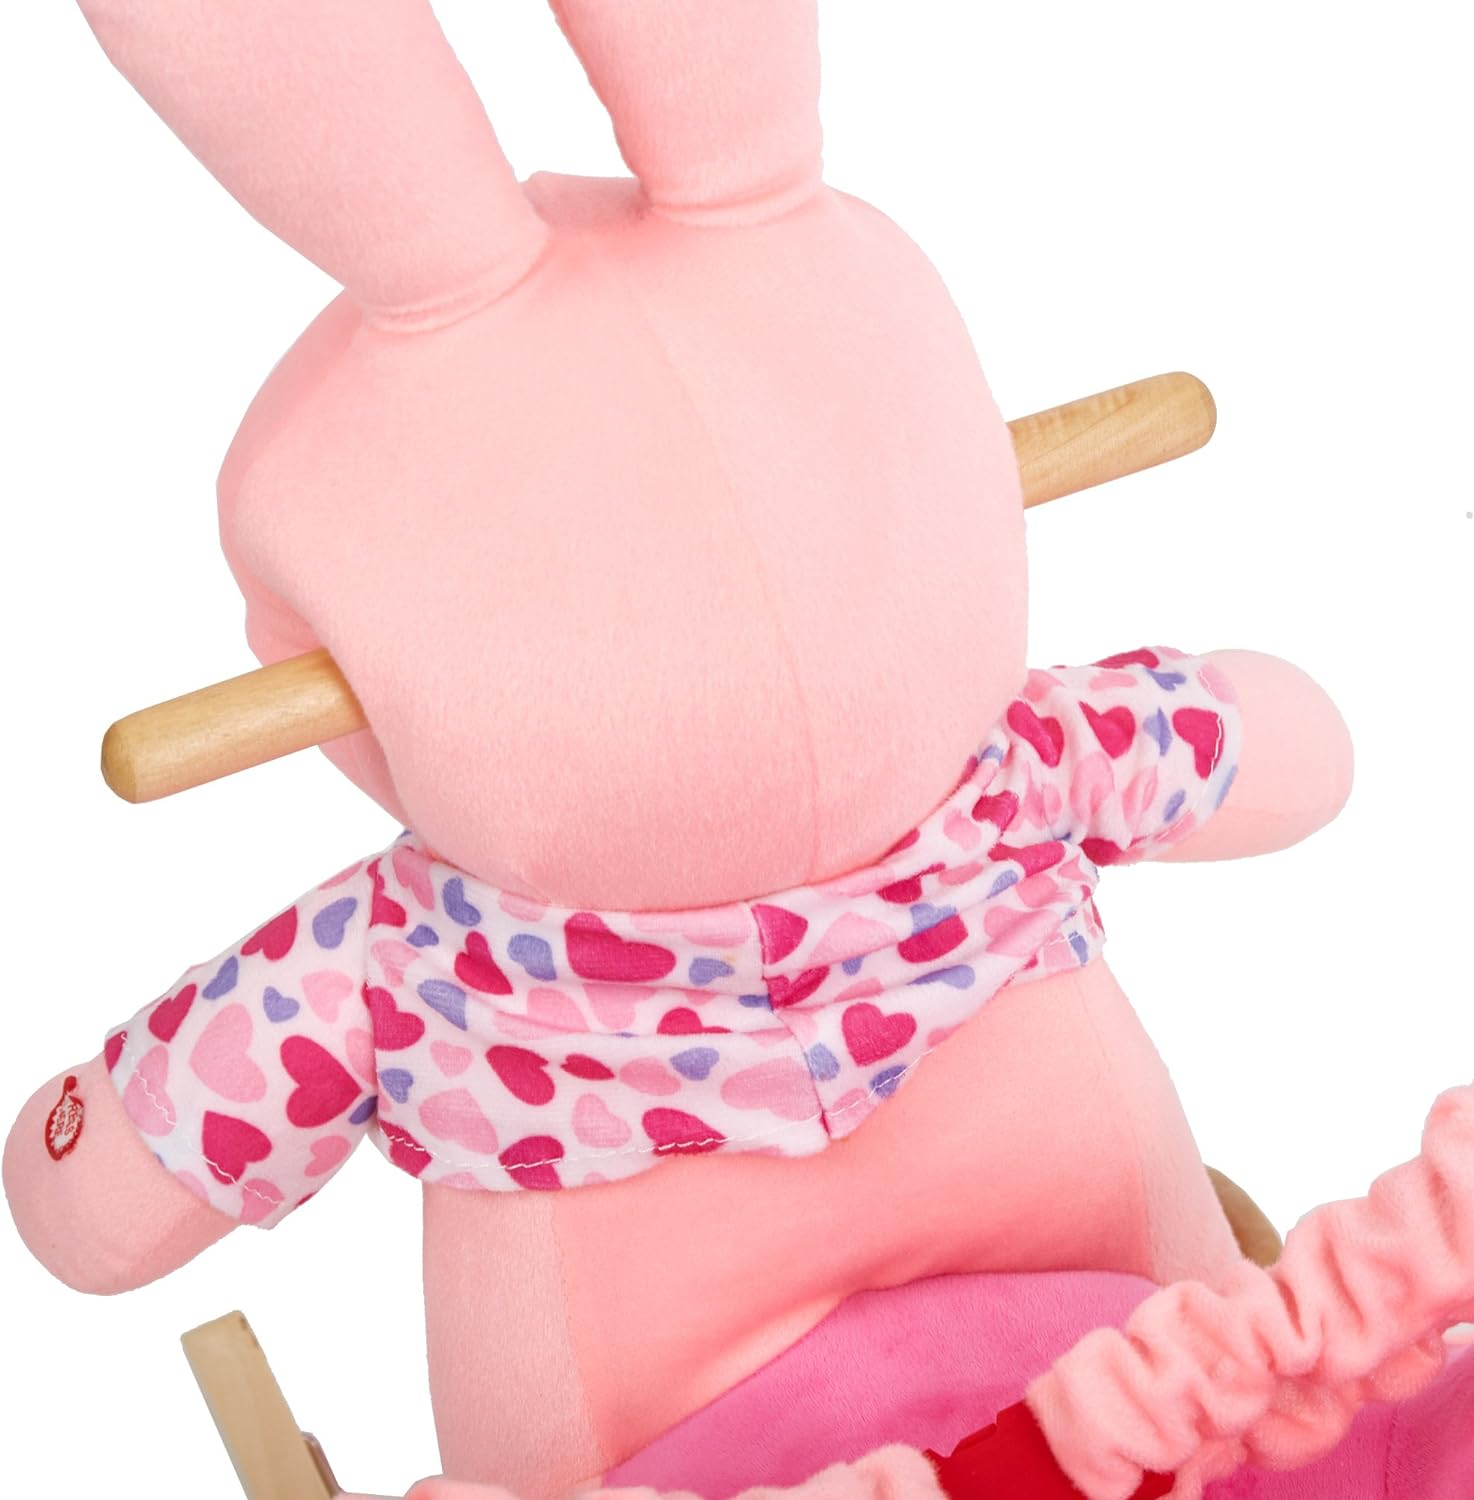 2-in-1 Ride-on Wooden Plush Rocking Horse Chair with Music for Baby Kids Toddlers, Pink Rabbit